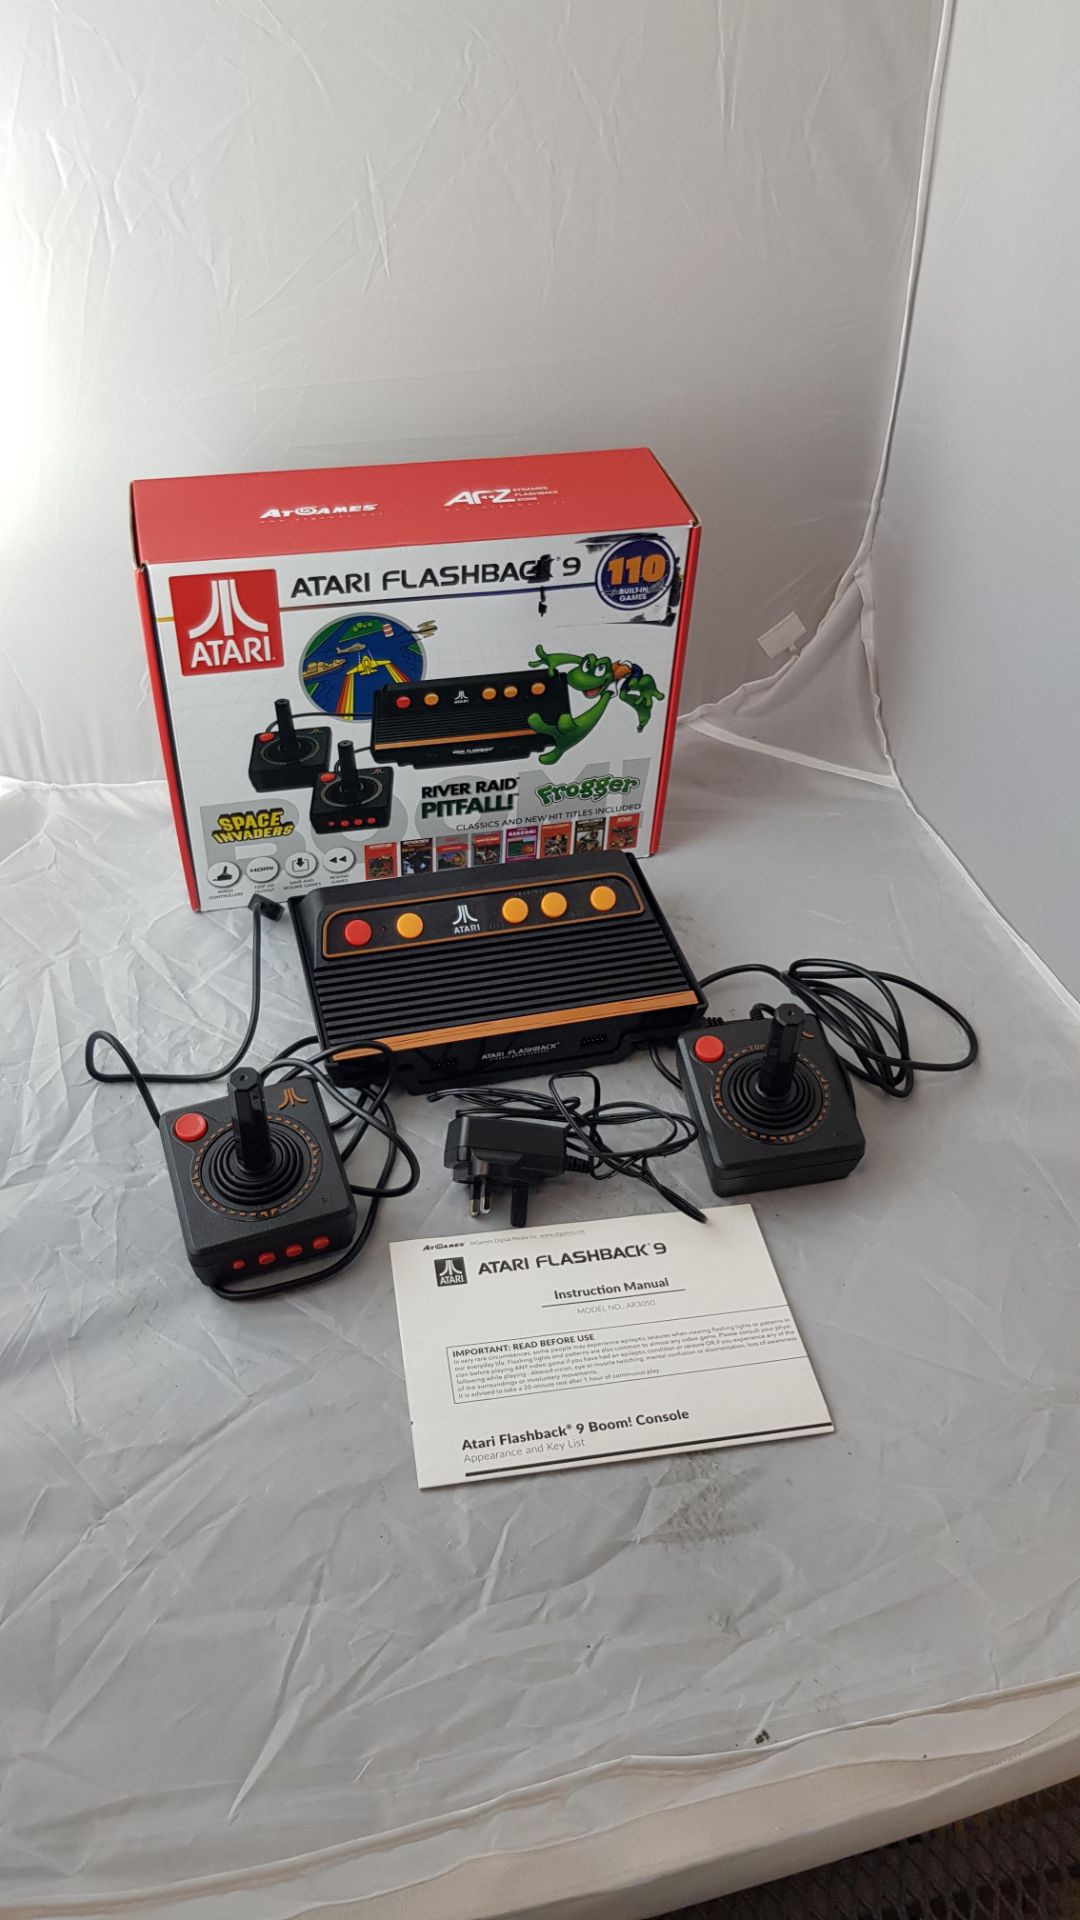 Atari Flashback 9 Games Console - 110 Built In Games. (RRP £85) Tested Ð Appears To Operate ... - Image 3 of 3